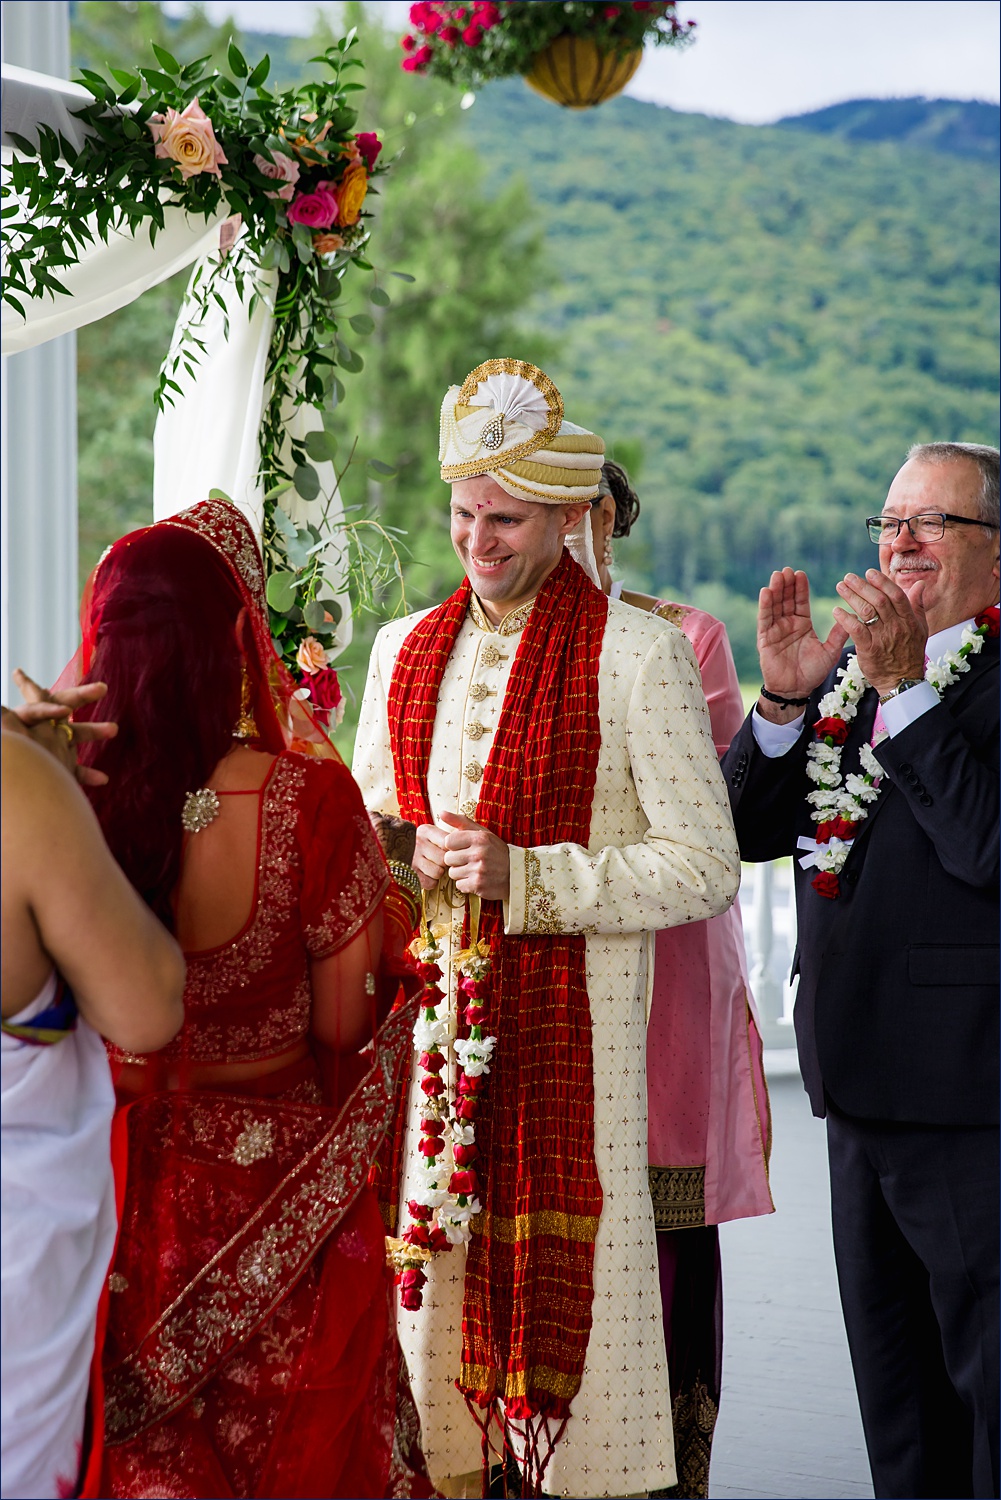 The groom marvels at the bride at the Kanya Aagaman part of the Hindu ceremony in New Hampshire on the veranda